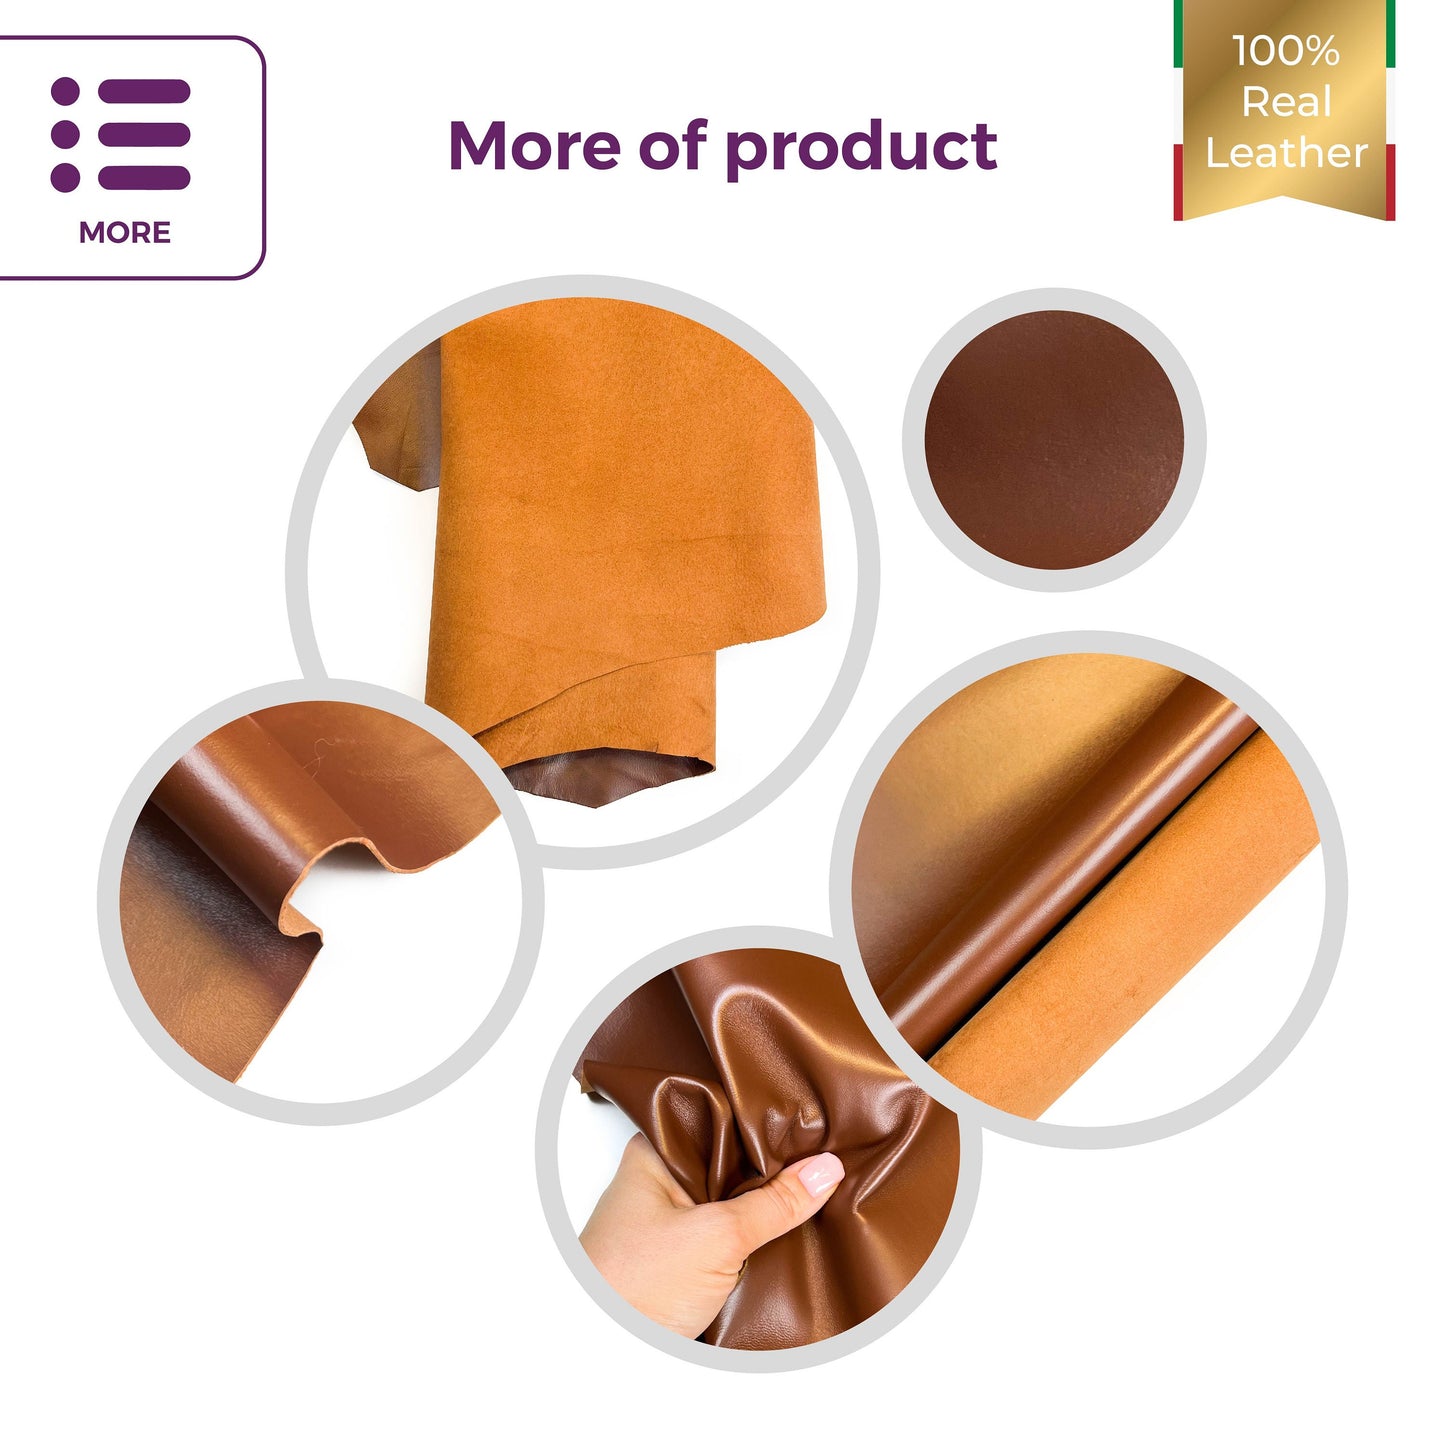 Brown Lambskin Leather 1.0mm/2.5oz / RUSSET 821